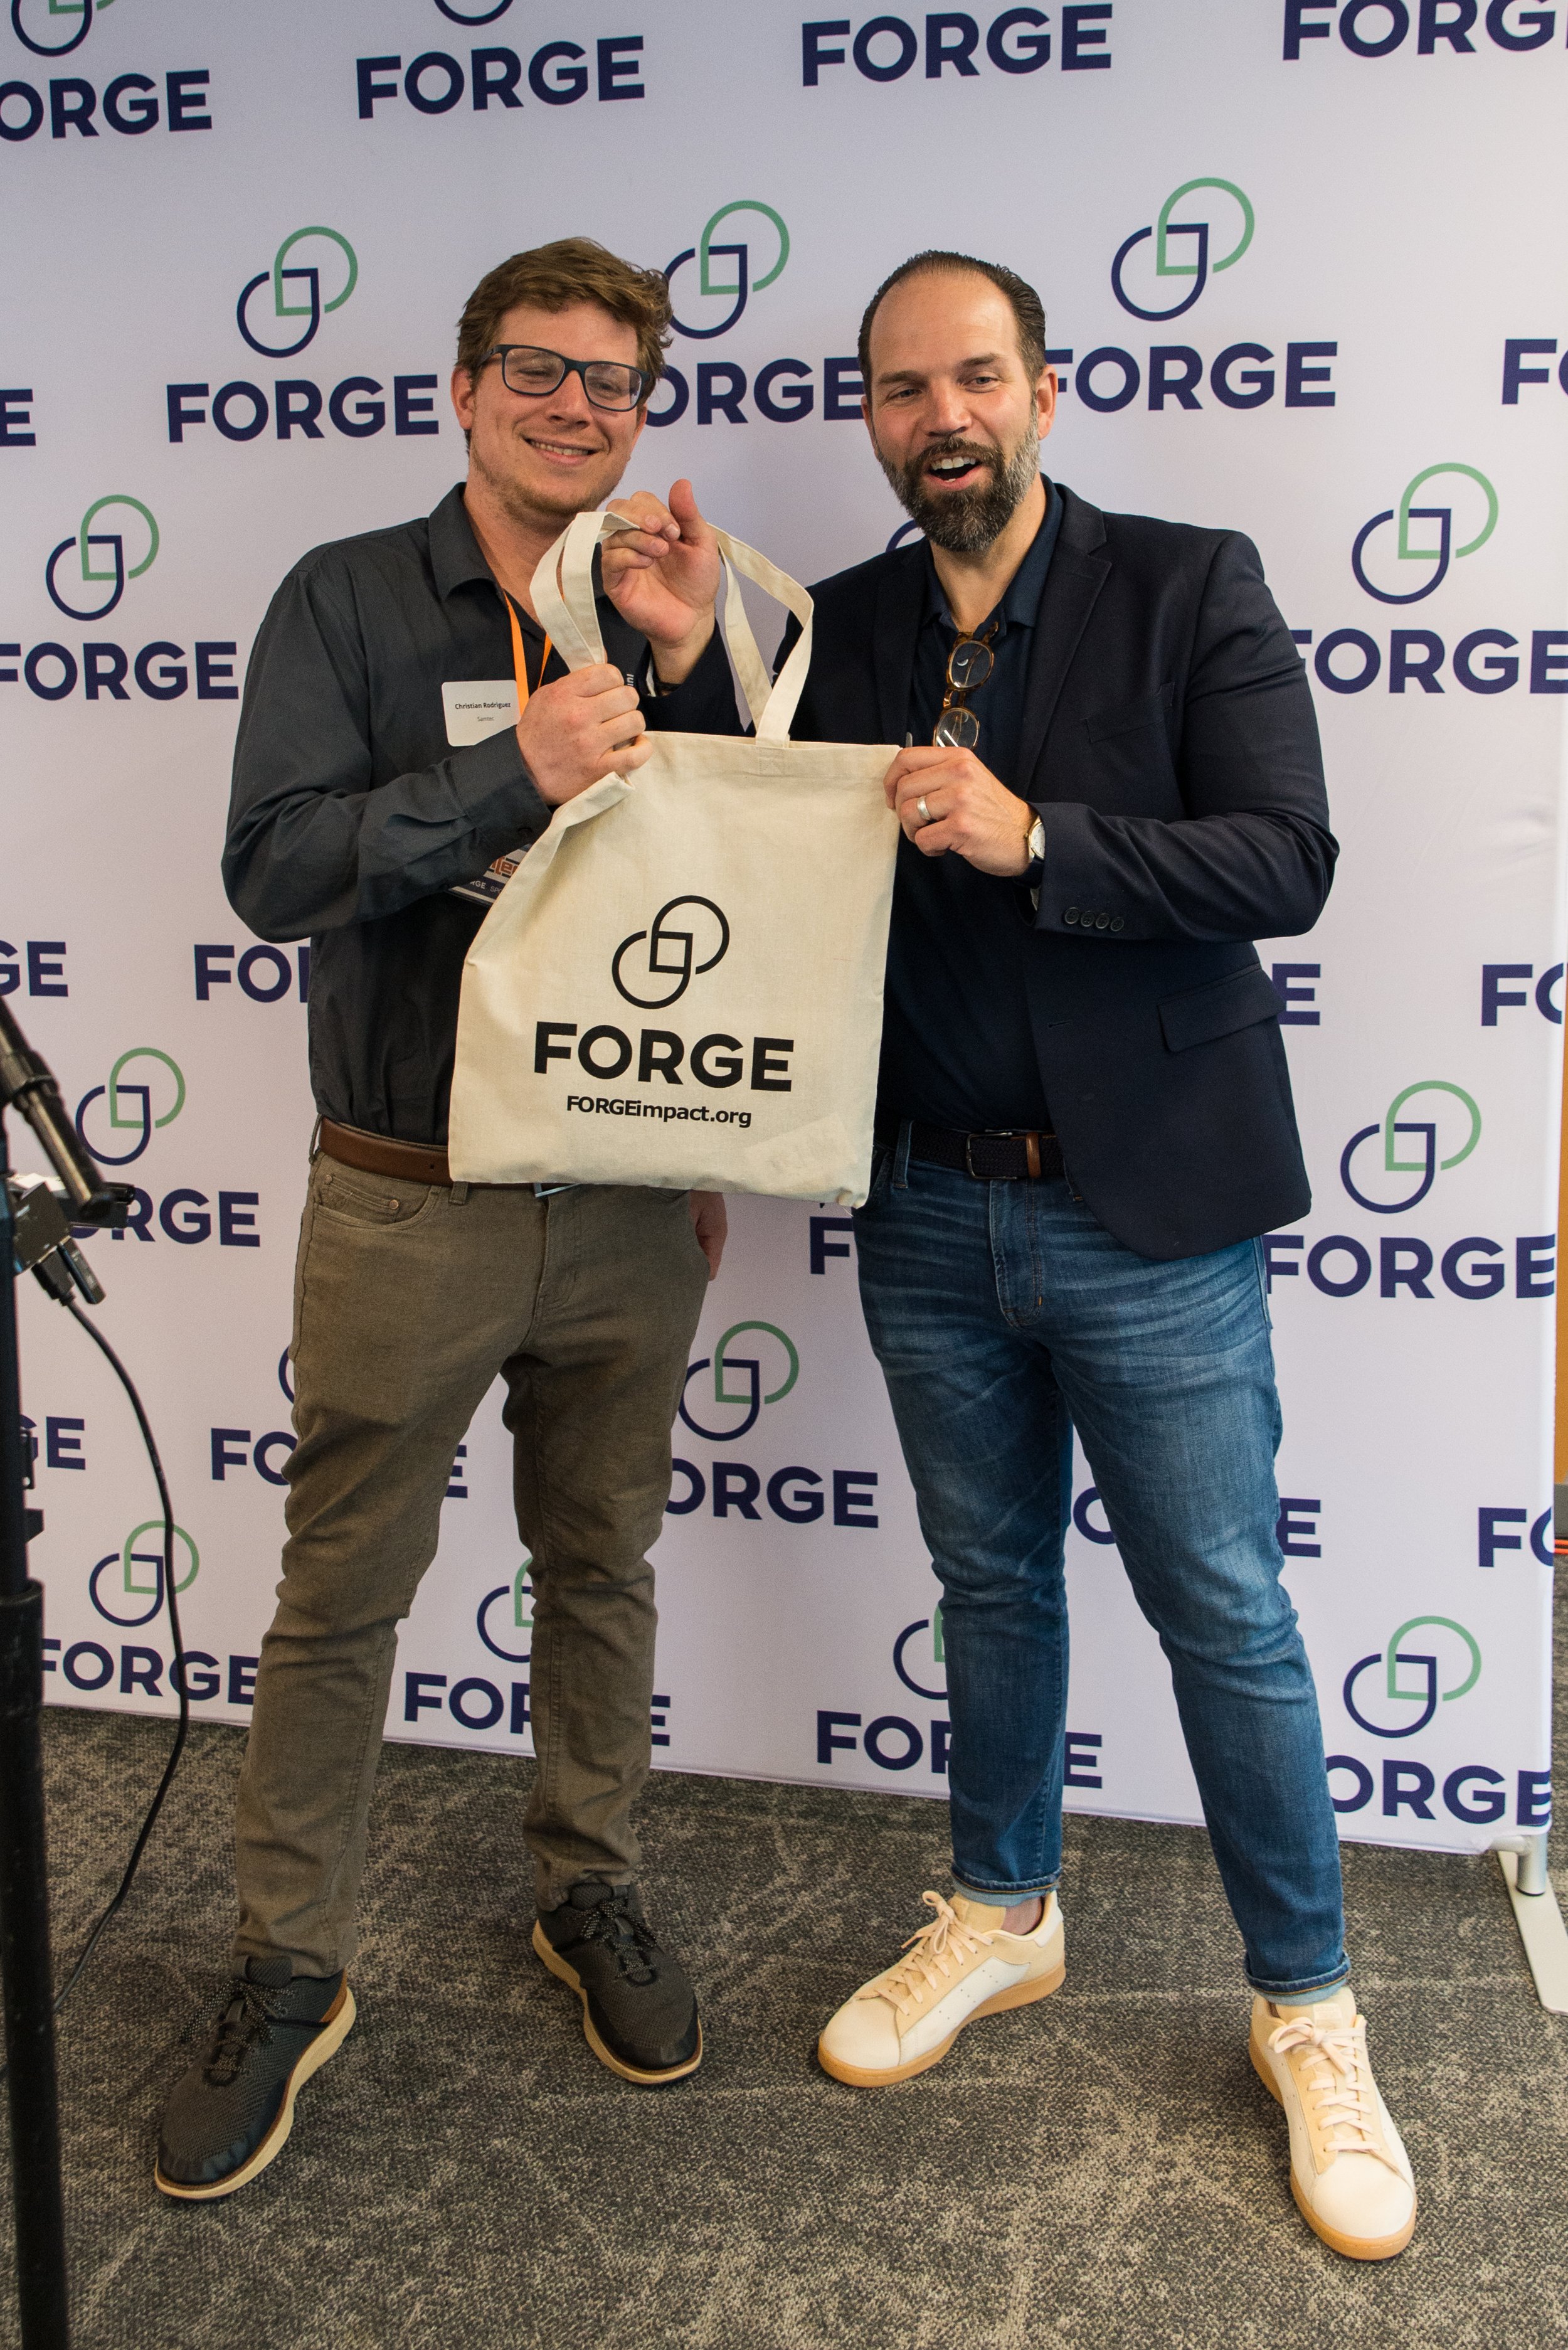  Samtec Field Application Engineer Christian Rodriguez and FORGE Vice President Adam Rodrigues pose with one of the swag bags of Connecticut-made products  